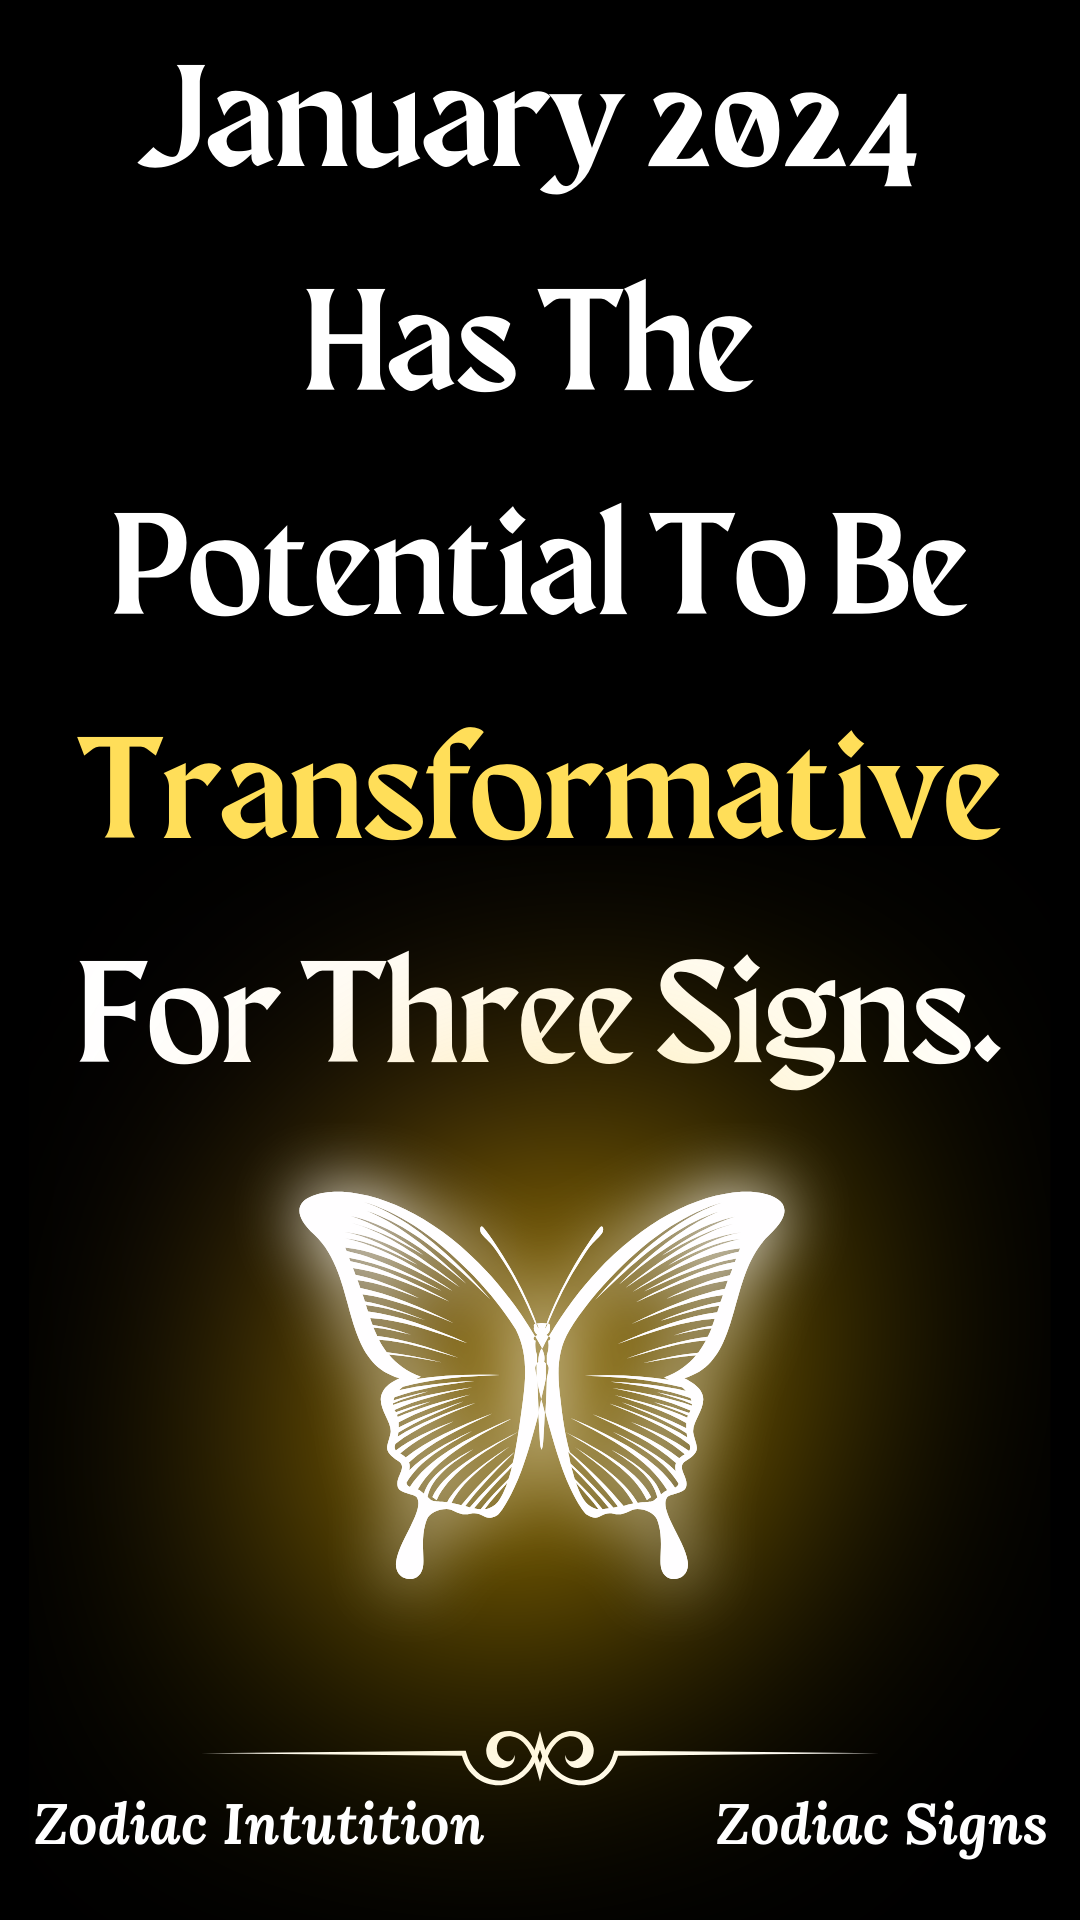 January 2024 Has The Potential To Be Transformative For Three Signs.